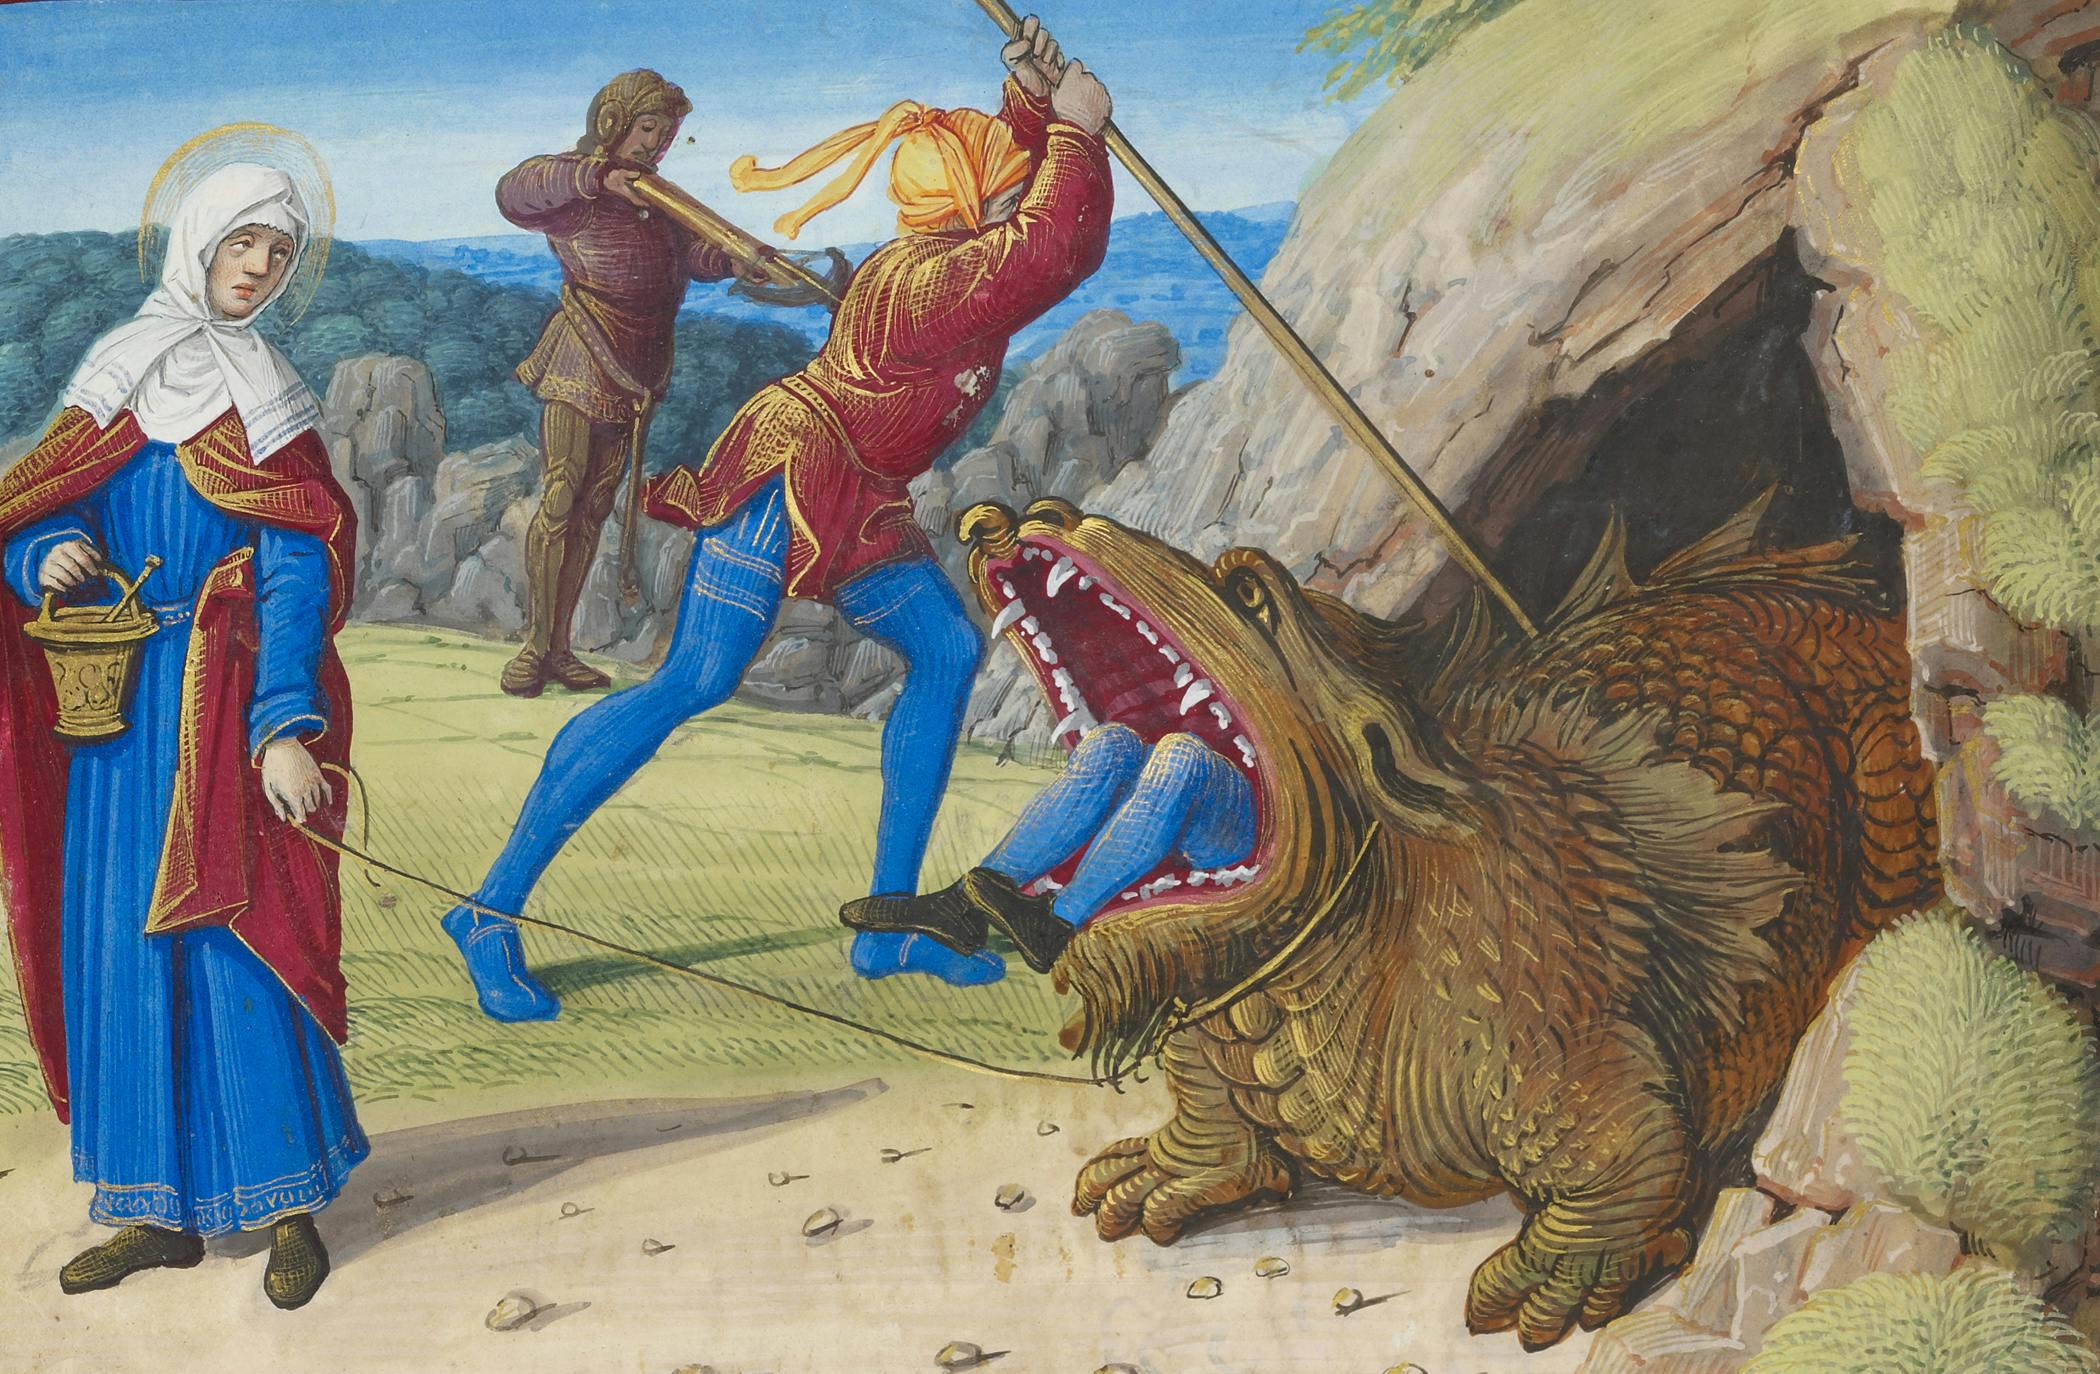 A medieval maiden in front of a man with a crossbow and a man with a lance stabbing a monster (swallowing another man whose legs are in mouth of the monster)